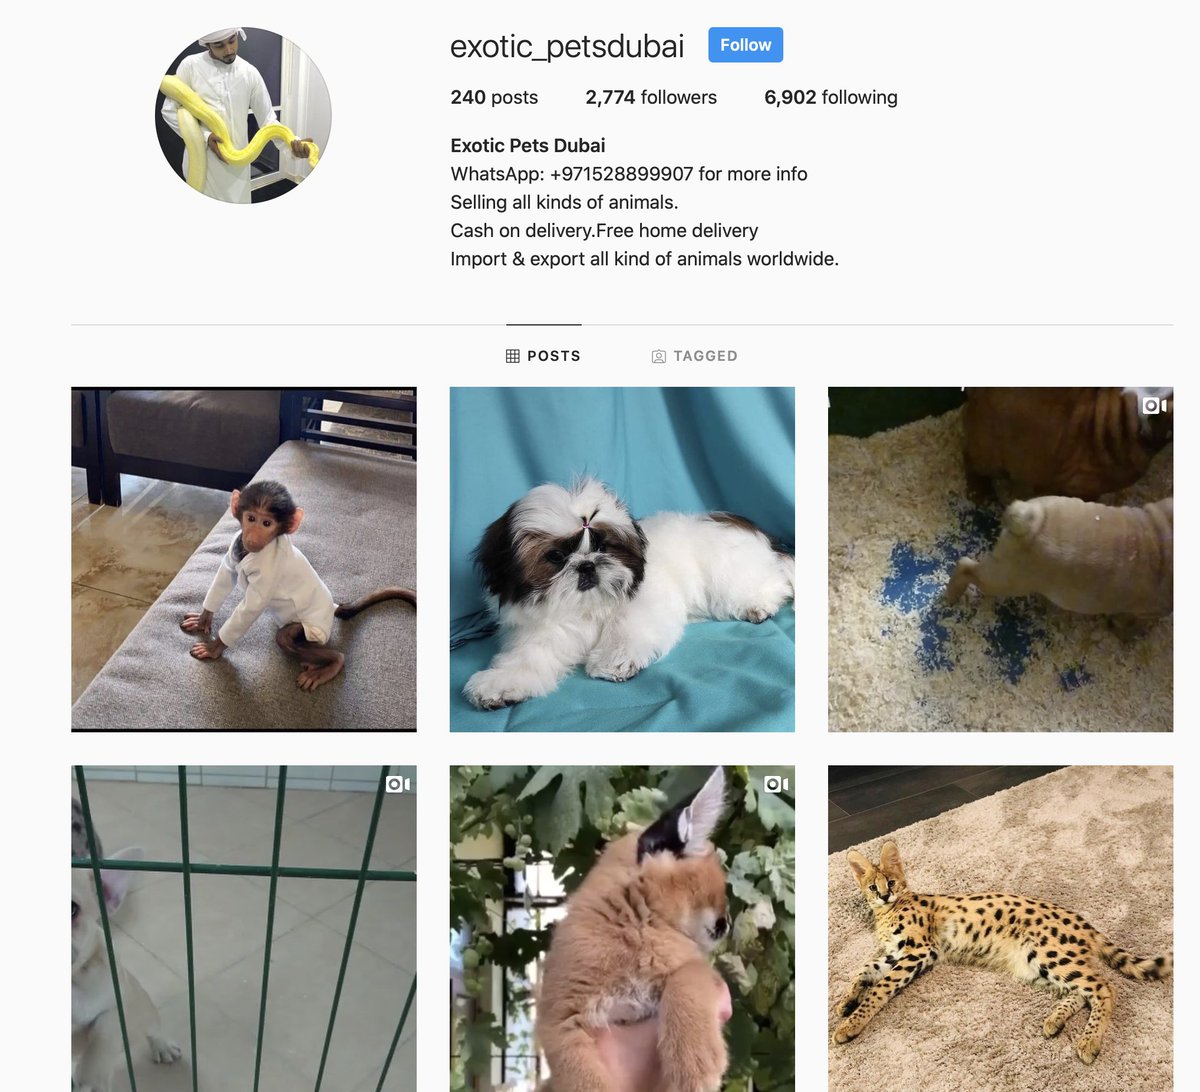 Beyond photoshoots, MBE.777 also appears to sell animals kept in the Dubai apartment. Another Instagram account, Exotic_Petsdubai, appears to help MBE.777 in these sales. This account is selling the animals in its posts worldwide, taking cash upon delivery to your home.